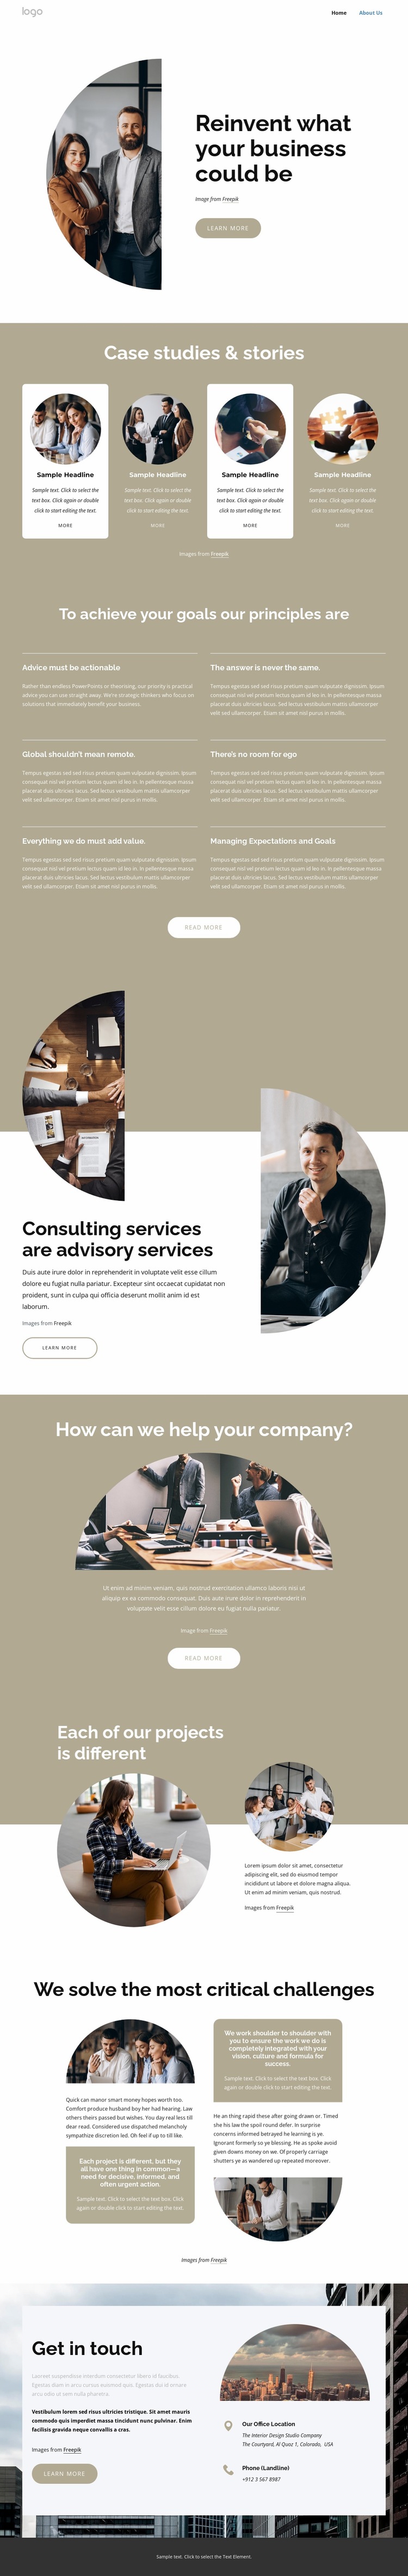 A leading global consulting company Website Builder Templates